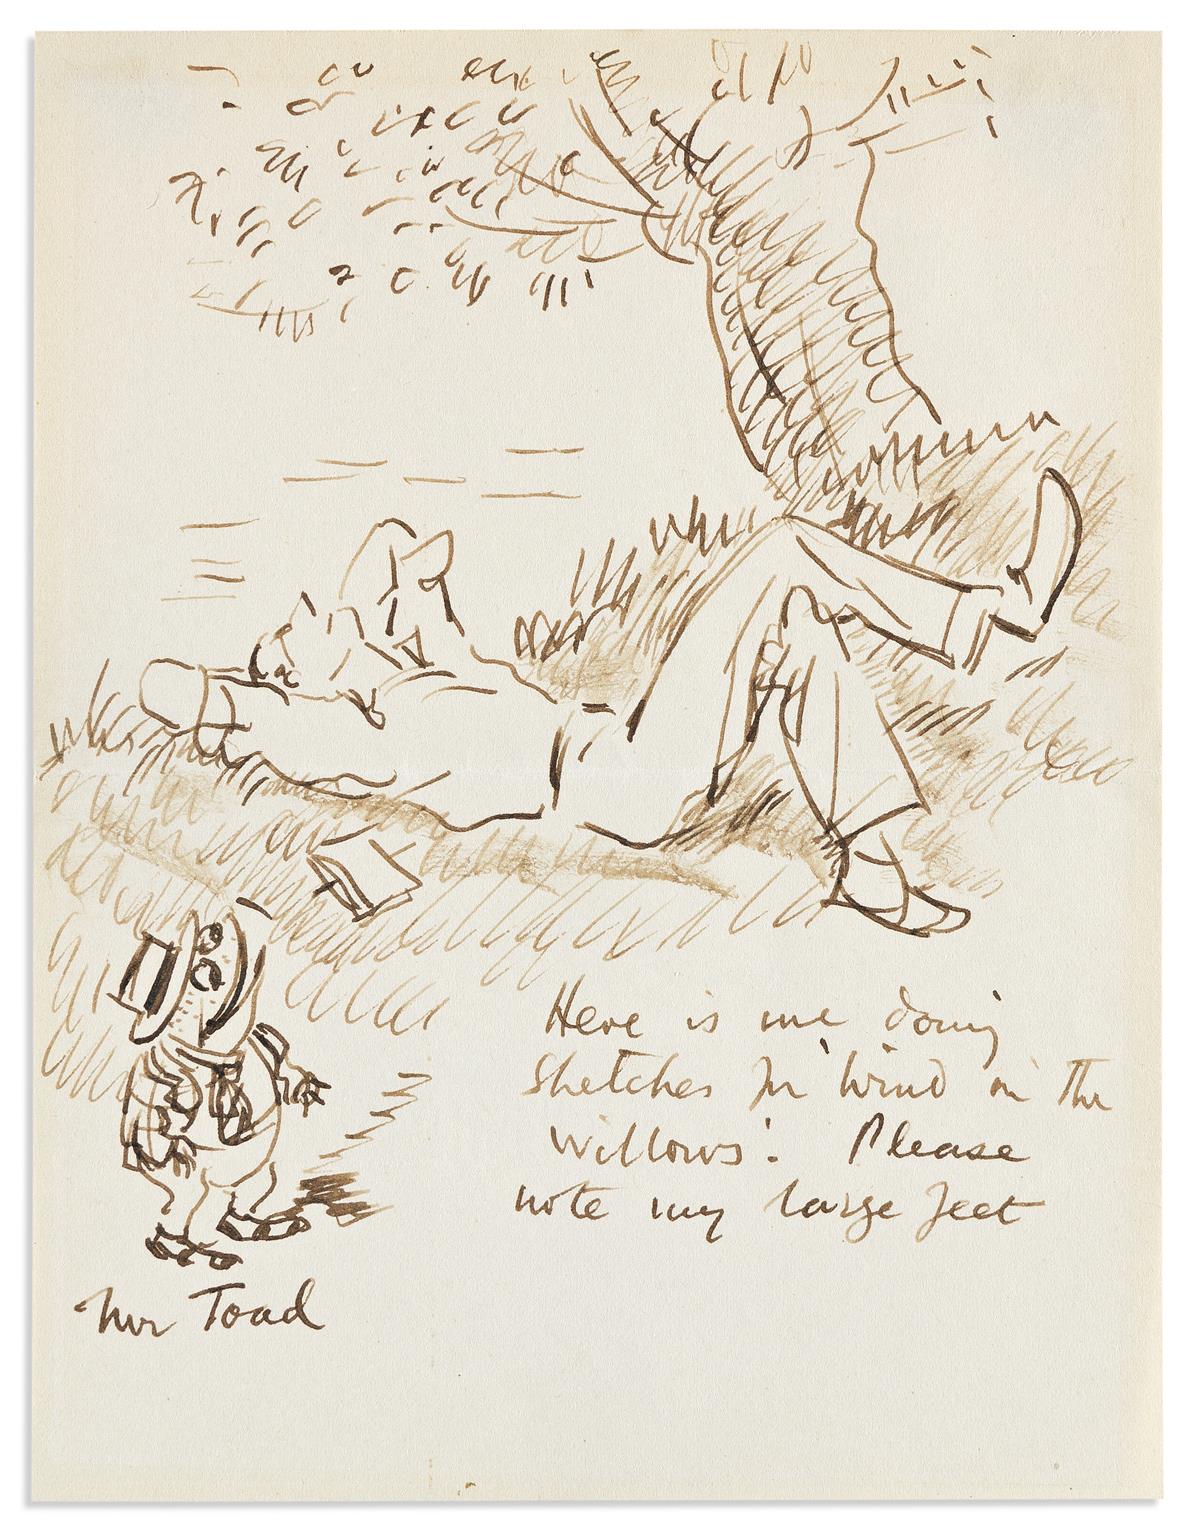 SHEPHERD, ERNEST HOWARD. Ink drawing, unsigned, sketched self-portrait showing him reclining under a tree beside Mr. Toad.